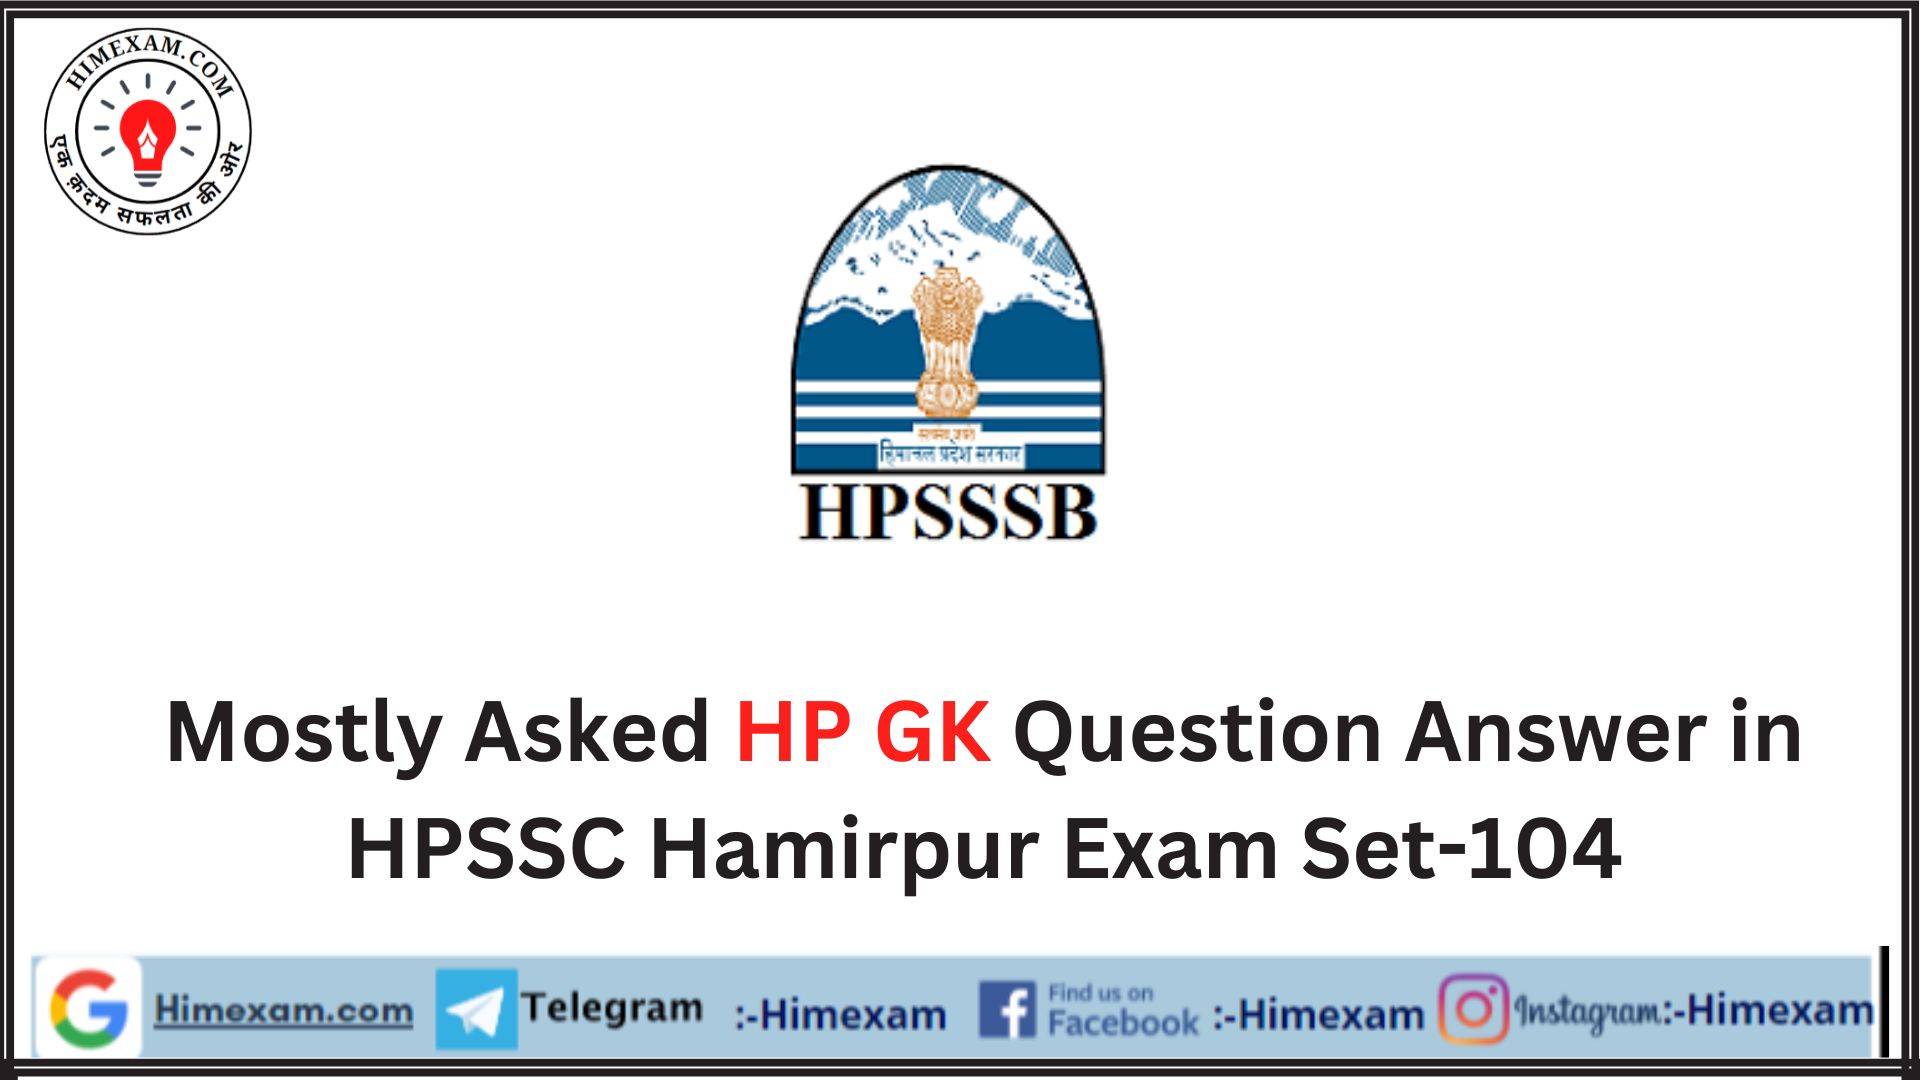 Mostly Asked HP GK Question Answer in HPSSC Hamirpur Exam Set-104